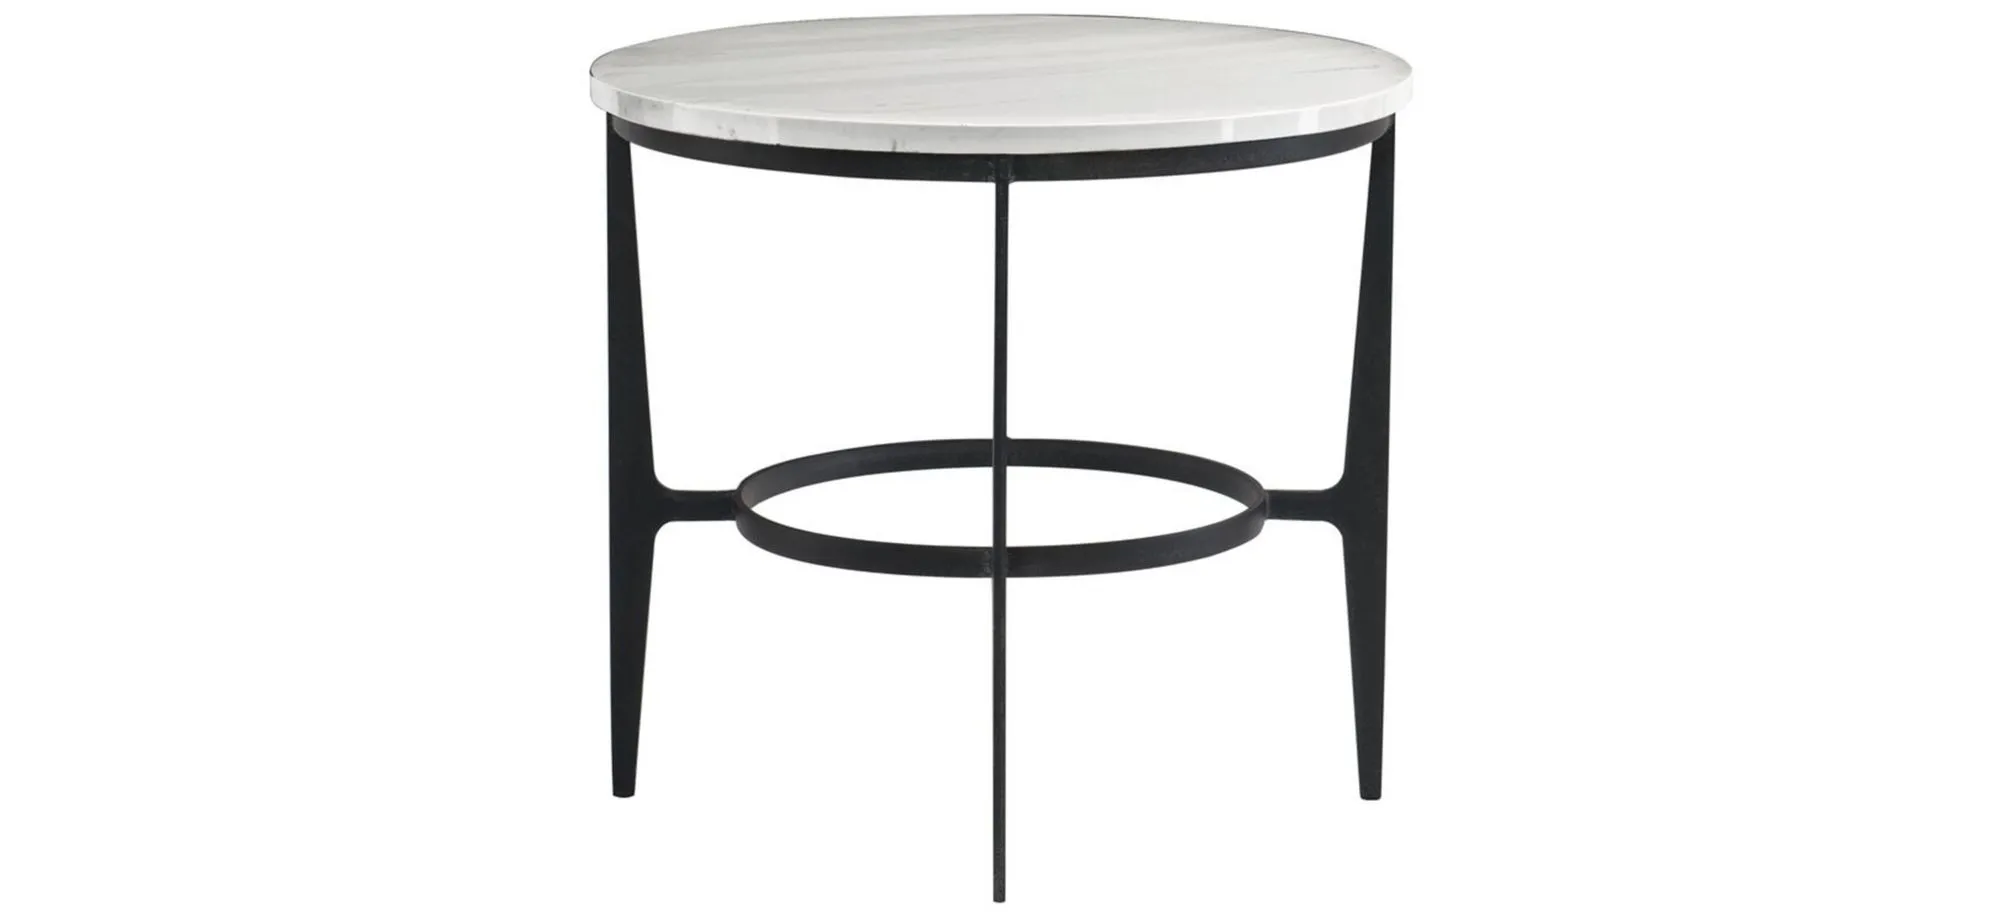 Alamance Round Metal End Table in Blackened by Bernhardt